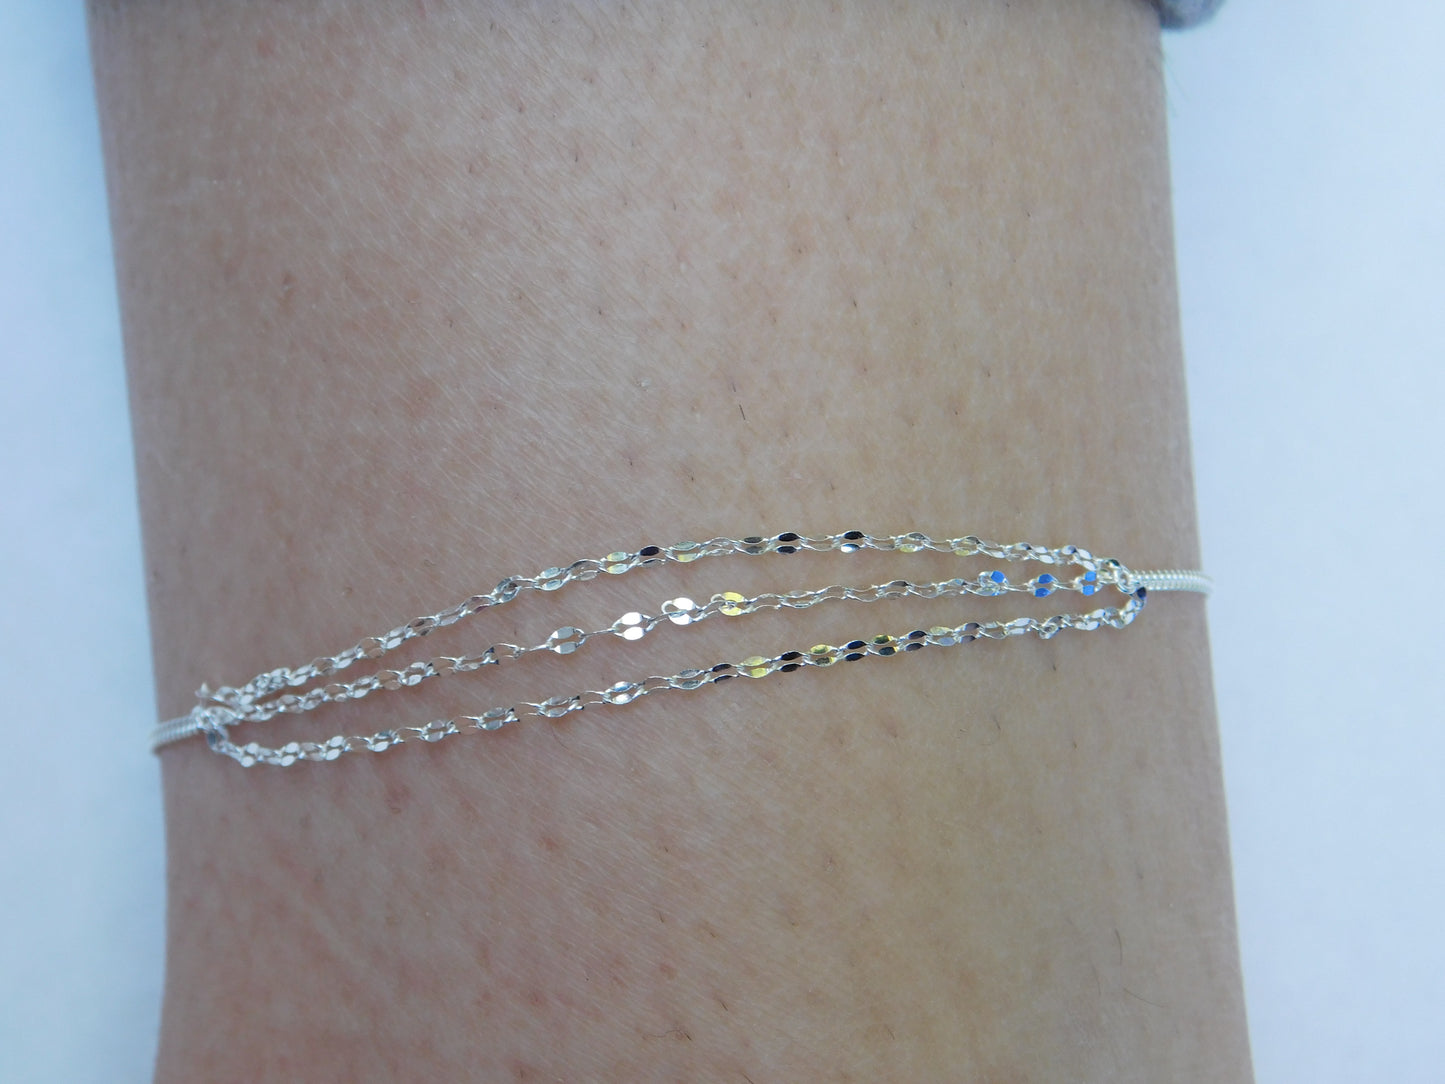 Multi-Layered Sterling Silver Anklet- Next Day Shipping